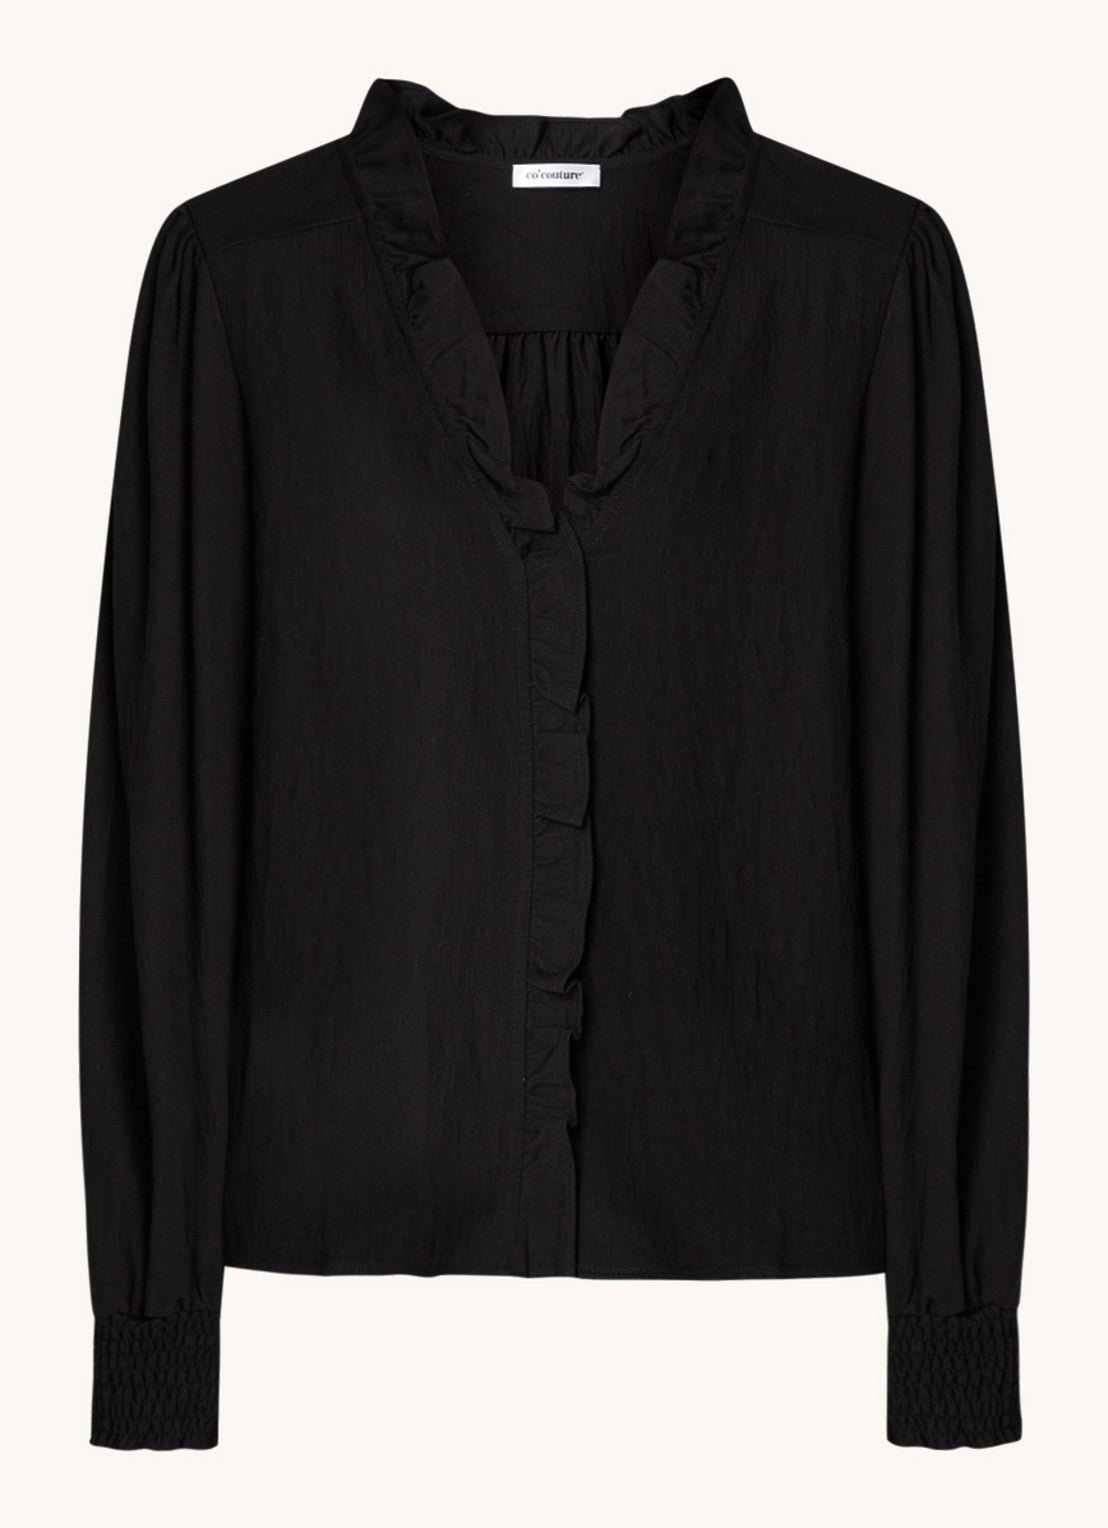 Co’Couture - Sueda Frill Shirt